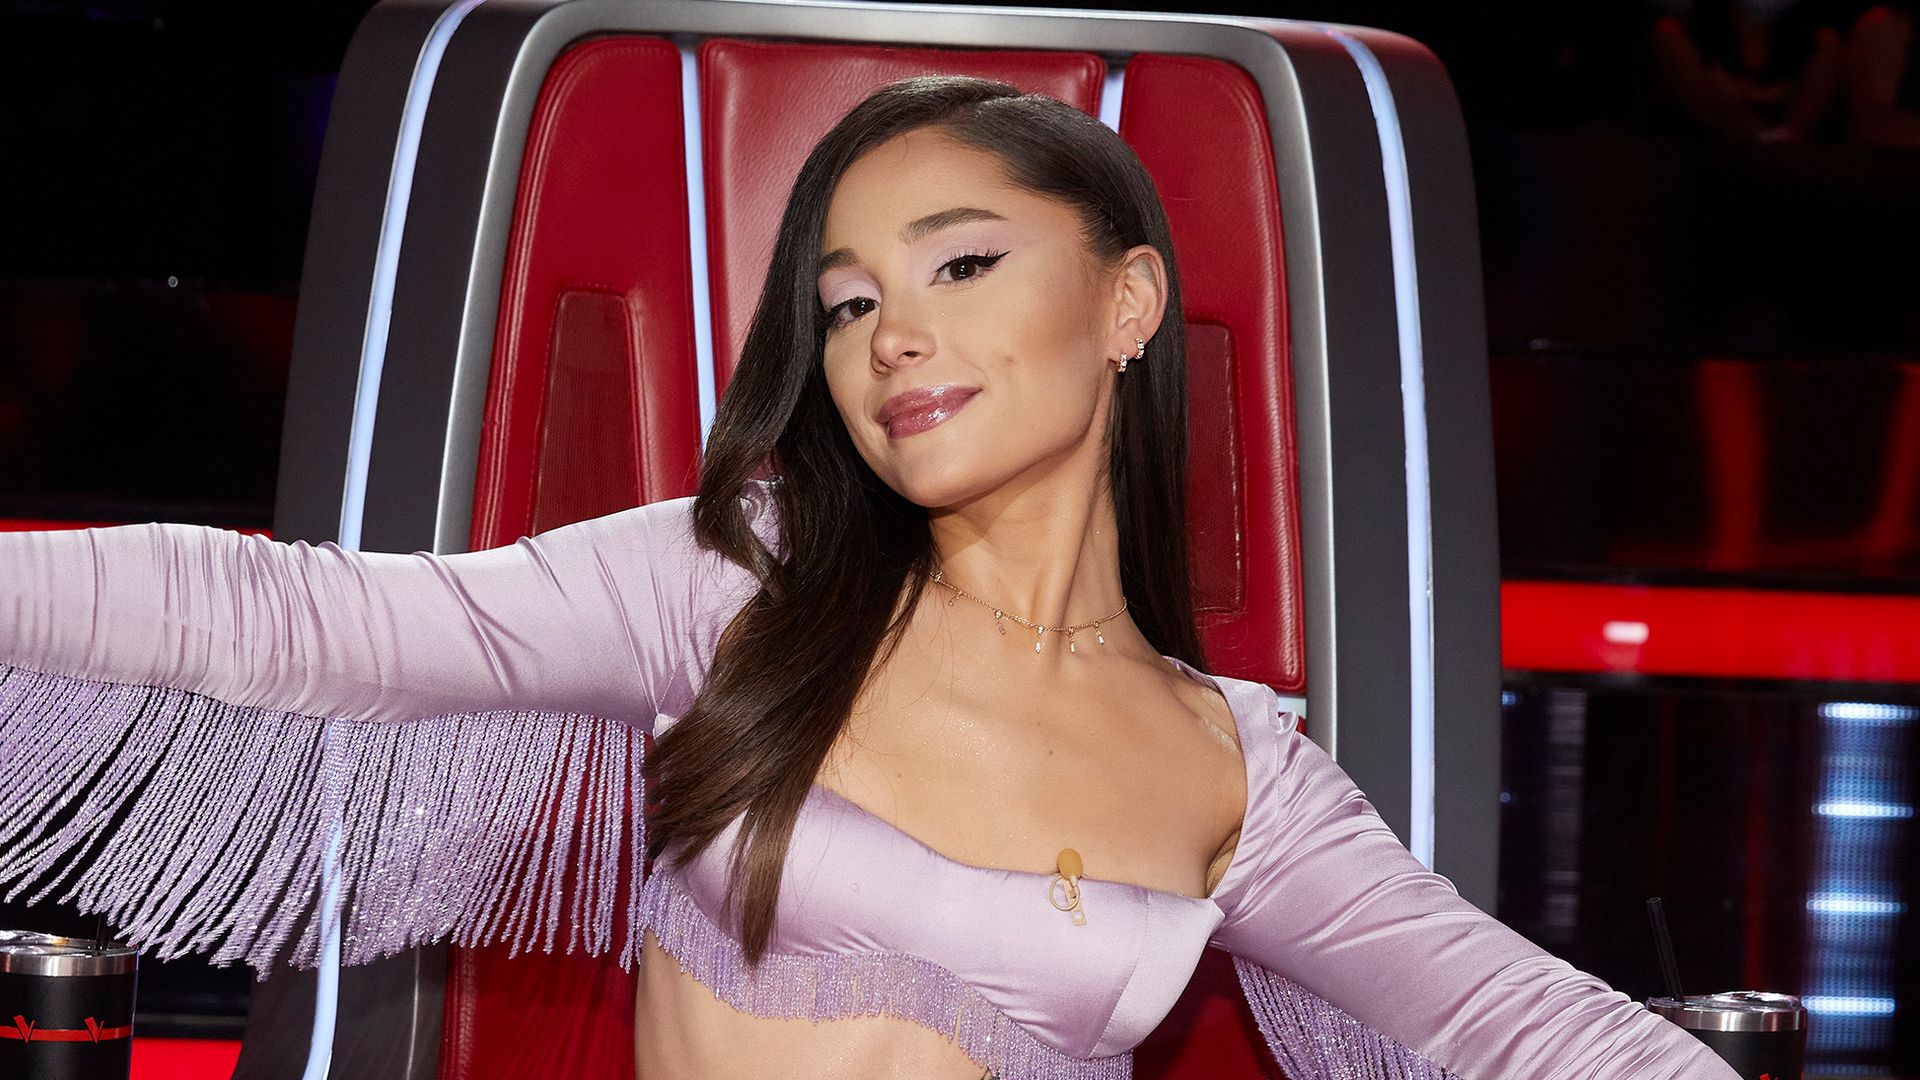 THE VOICE -- Battle Rounds Episode 2107 -- Pictured: Ariana Grande